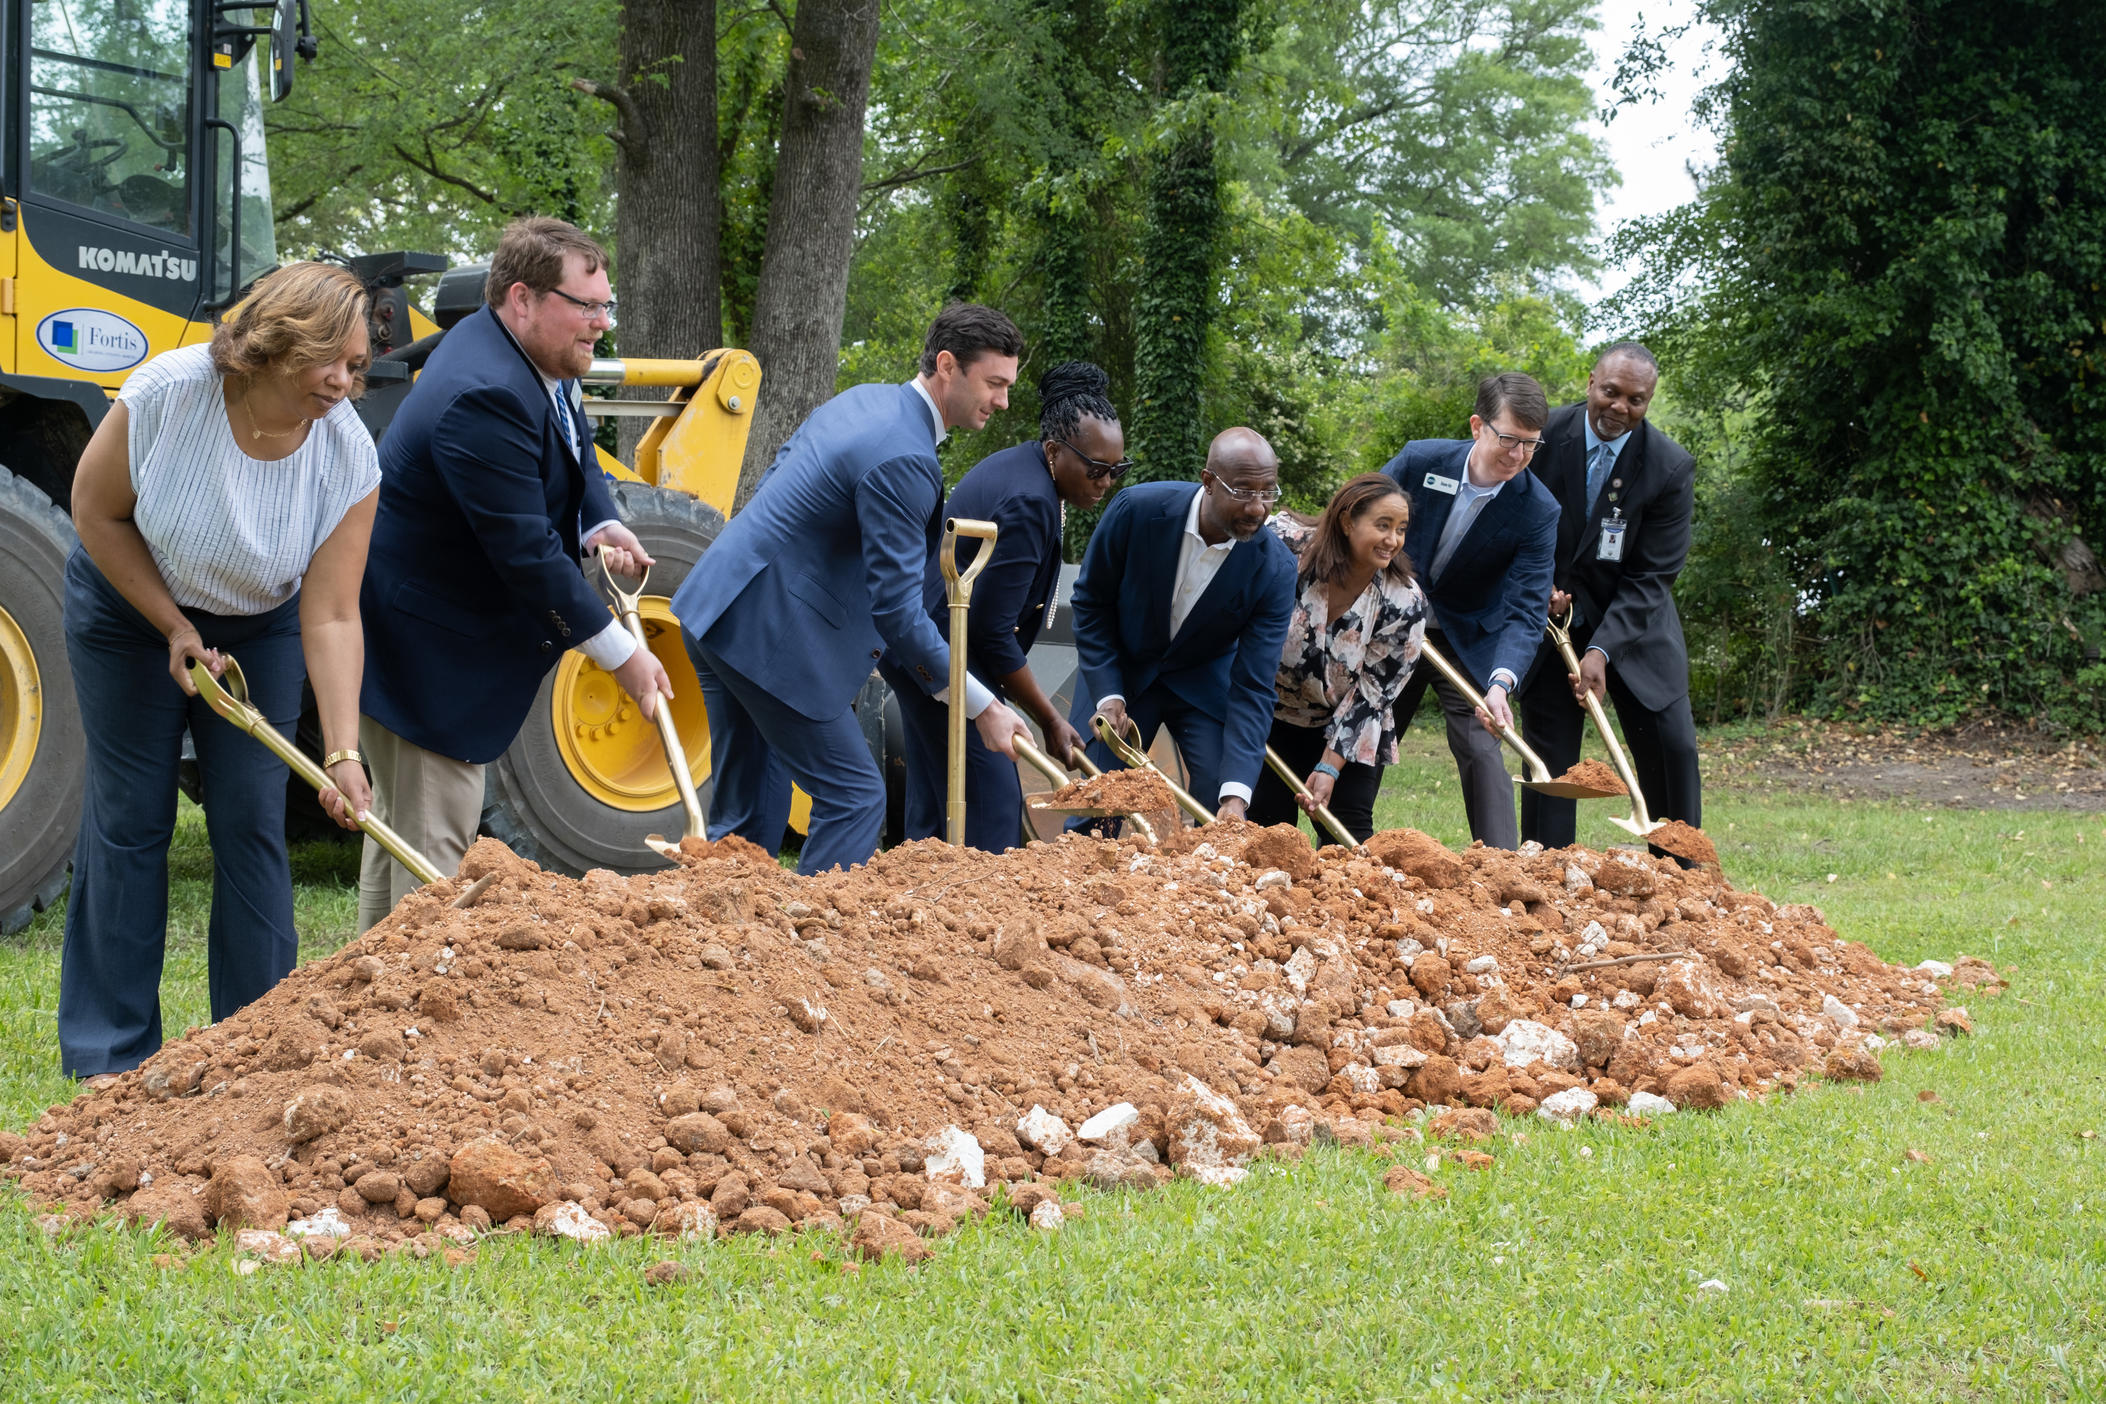 U.S. Sens. Jon Ossoff and Raphael Warnock join county and city leaders at the groundbreaking of the new sewer system in McIntyre, Ga., on April 24, 2023.